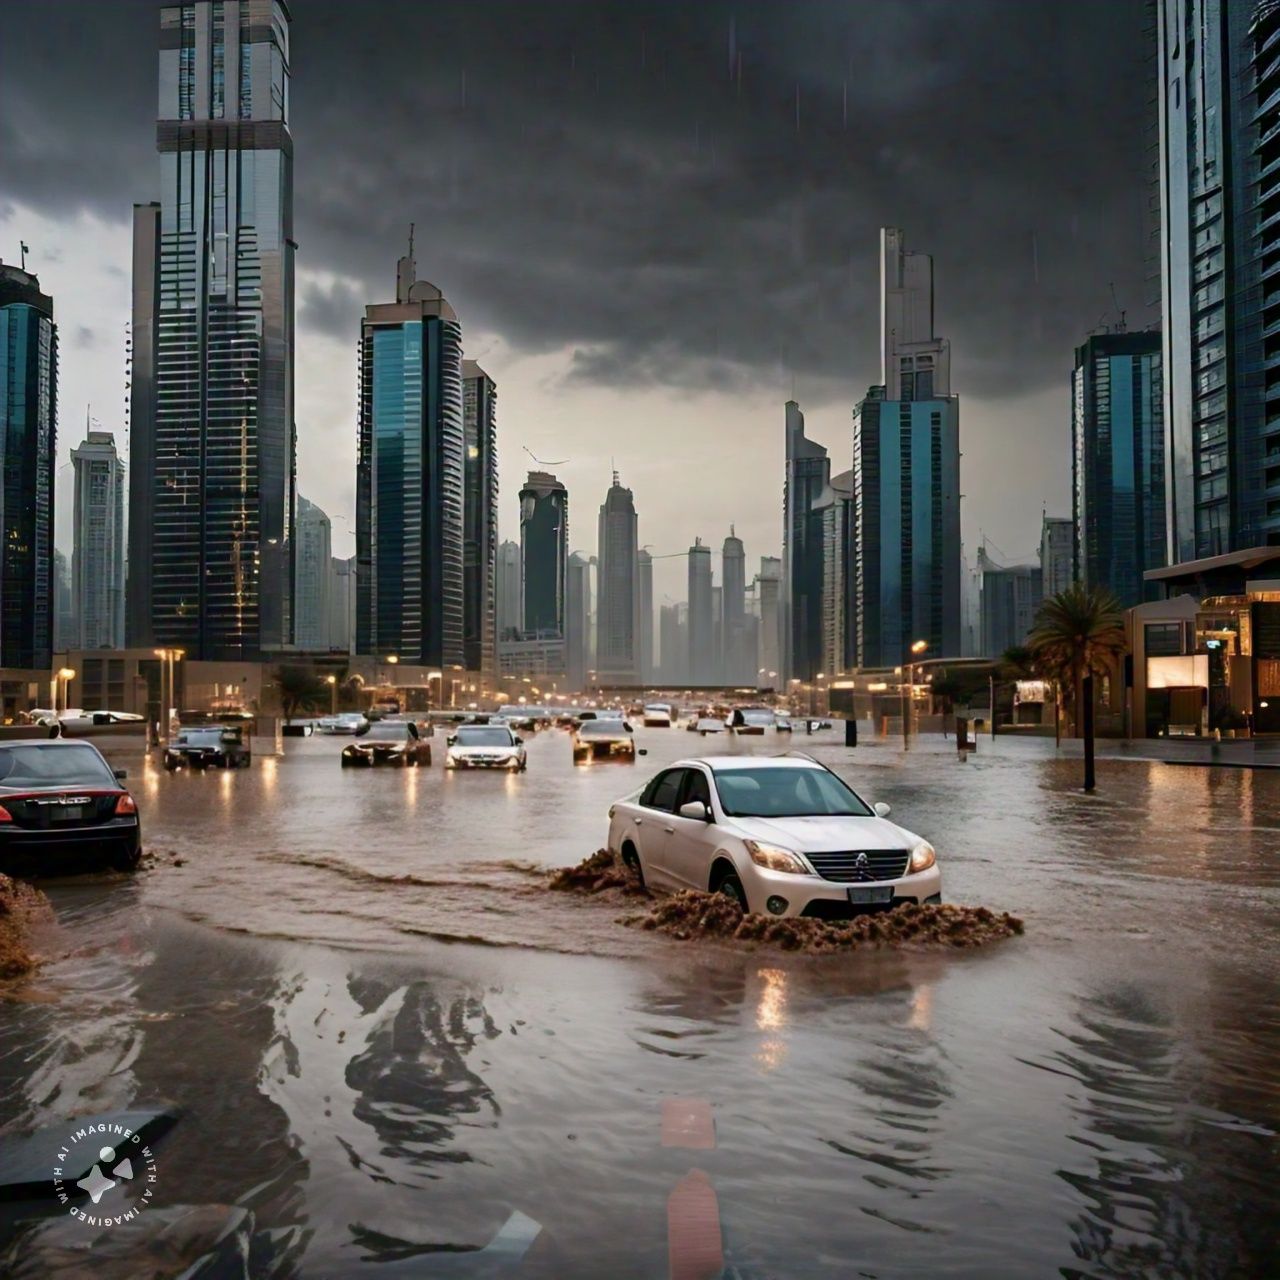 Dubai Flooding: The Unprecedented Deluge that Brought the City to a Standstil